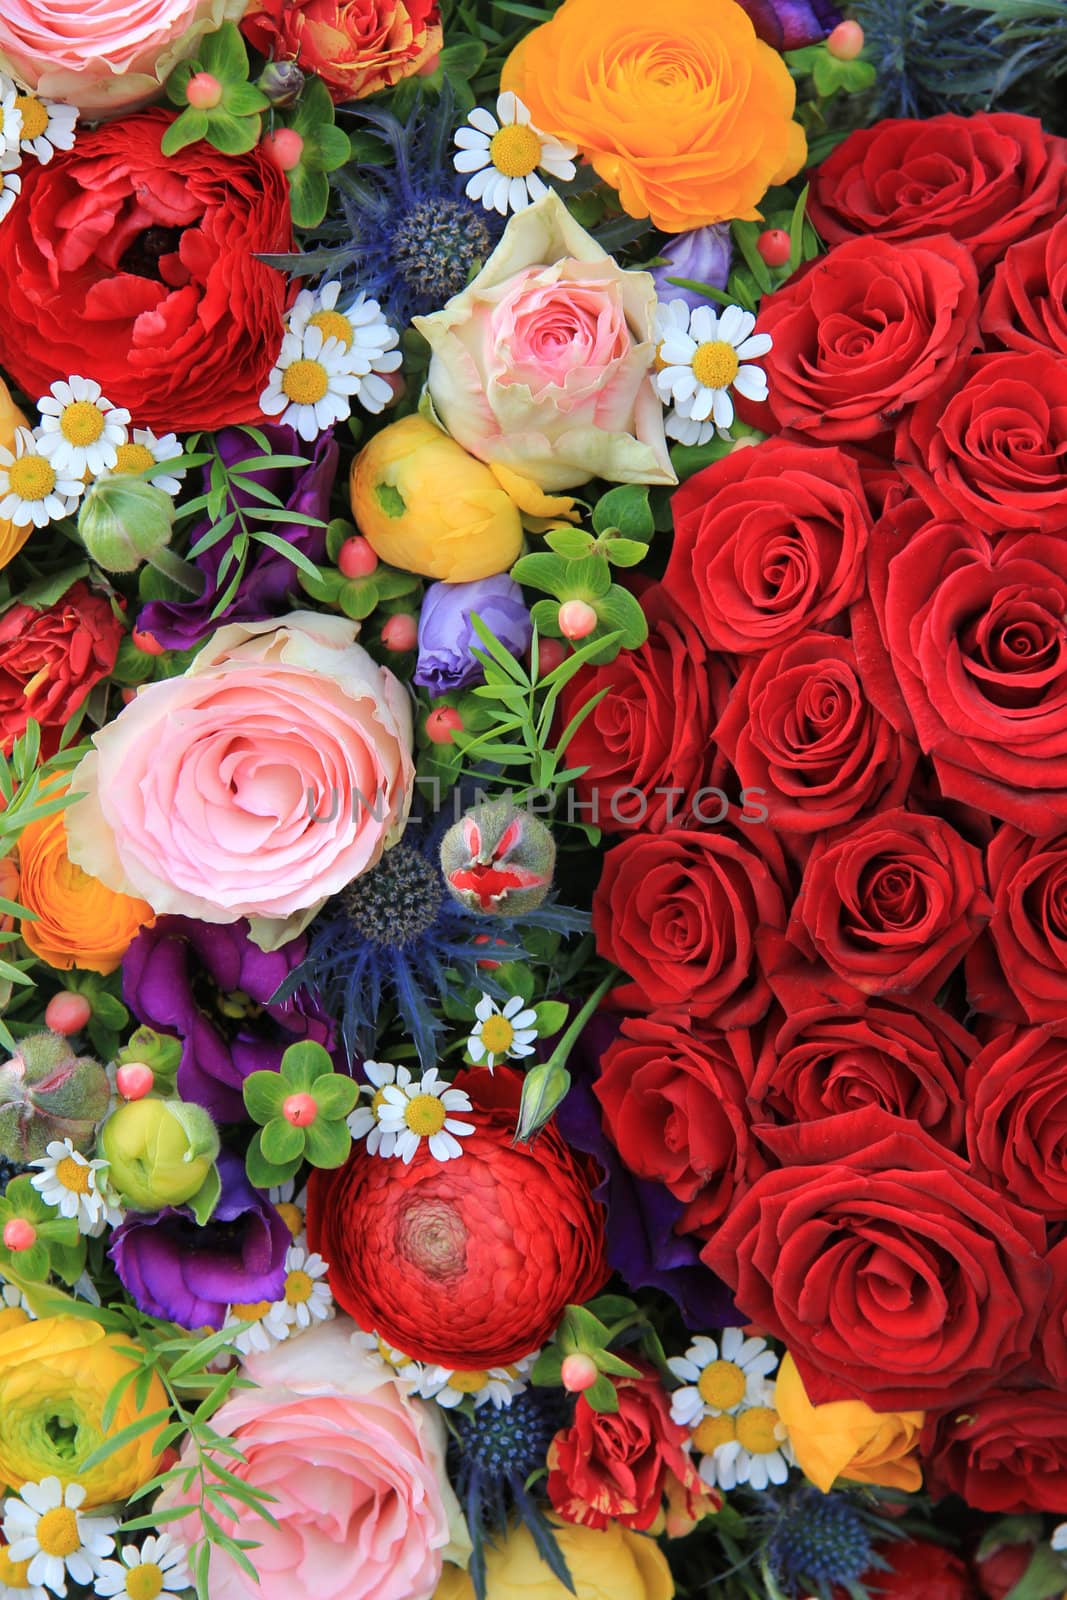 Summer flower arrangement in many bright colors